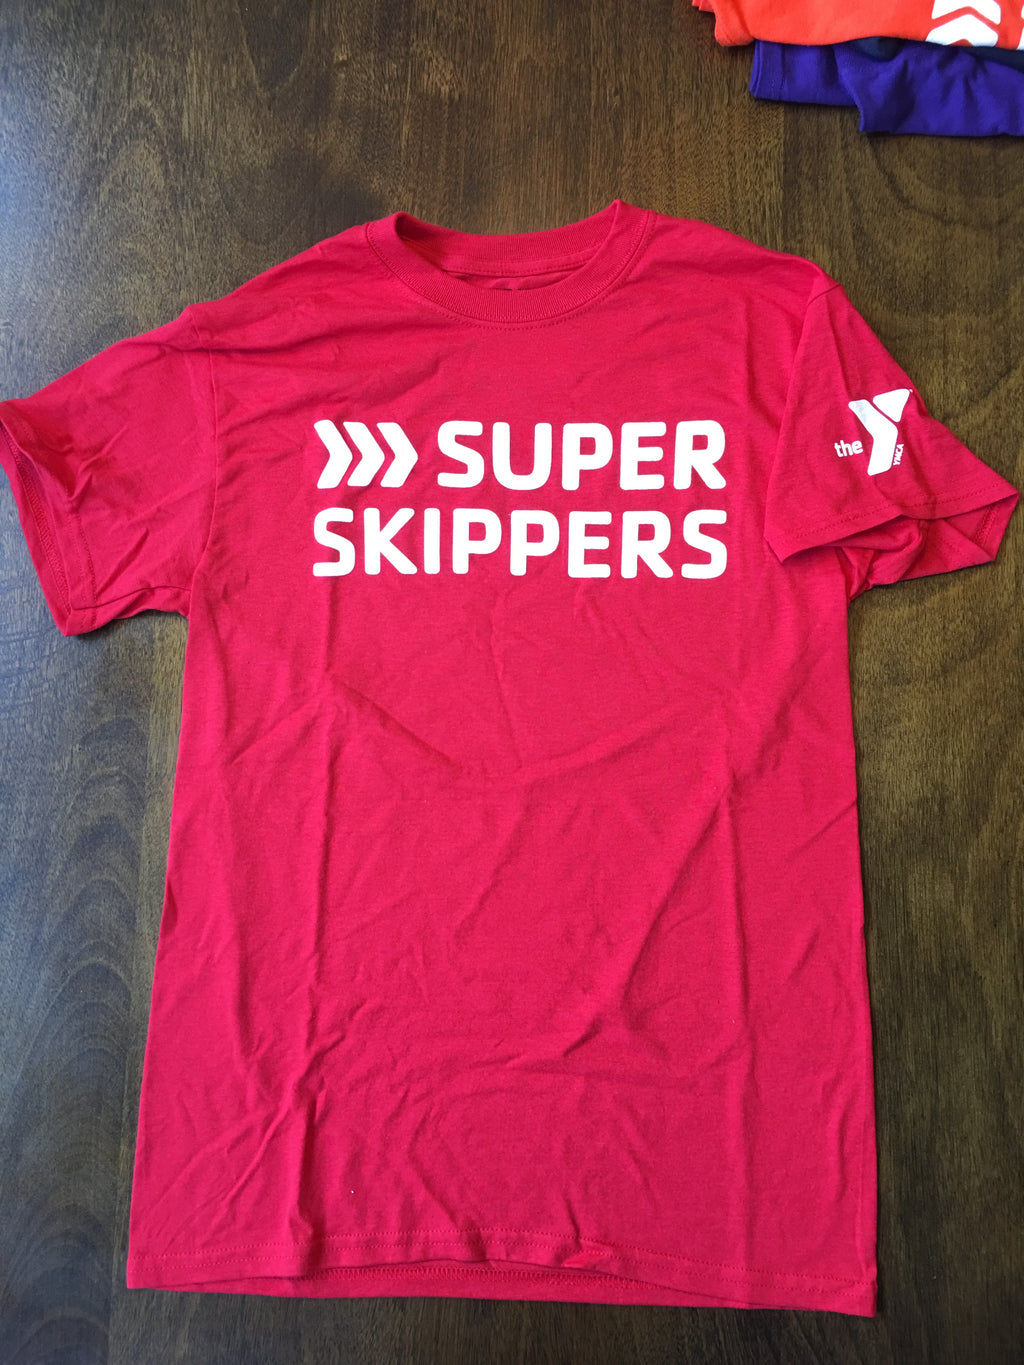 Super Skippers Level T-Shirt-Red